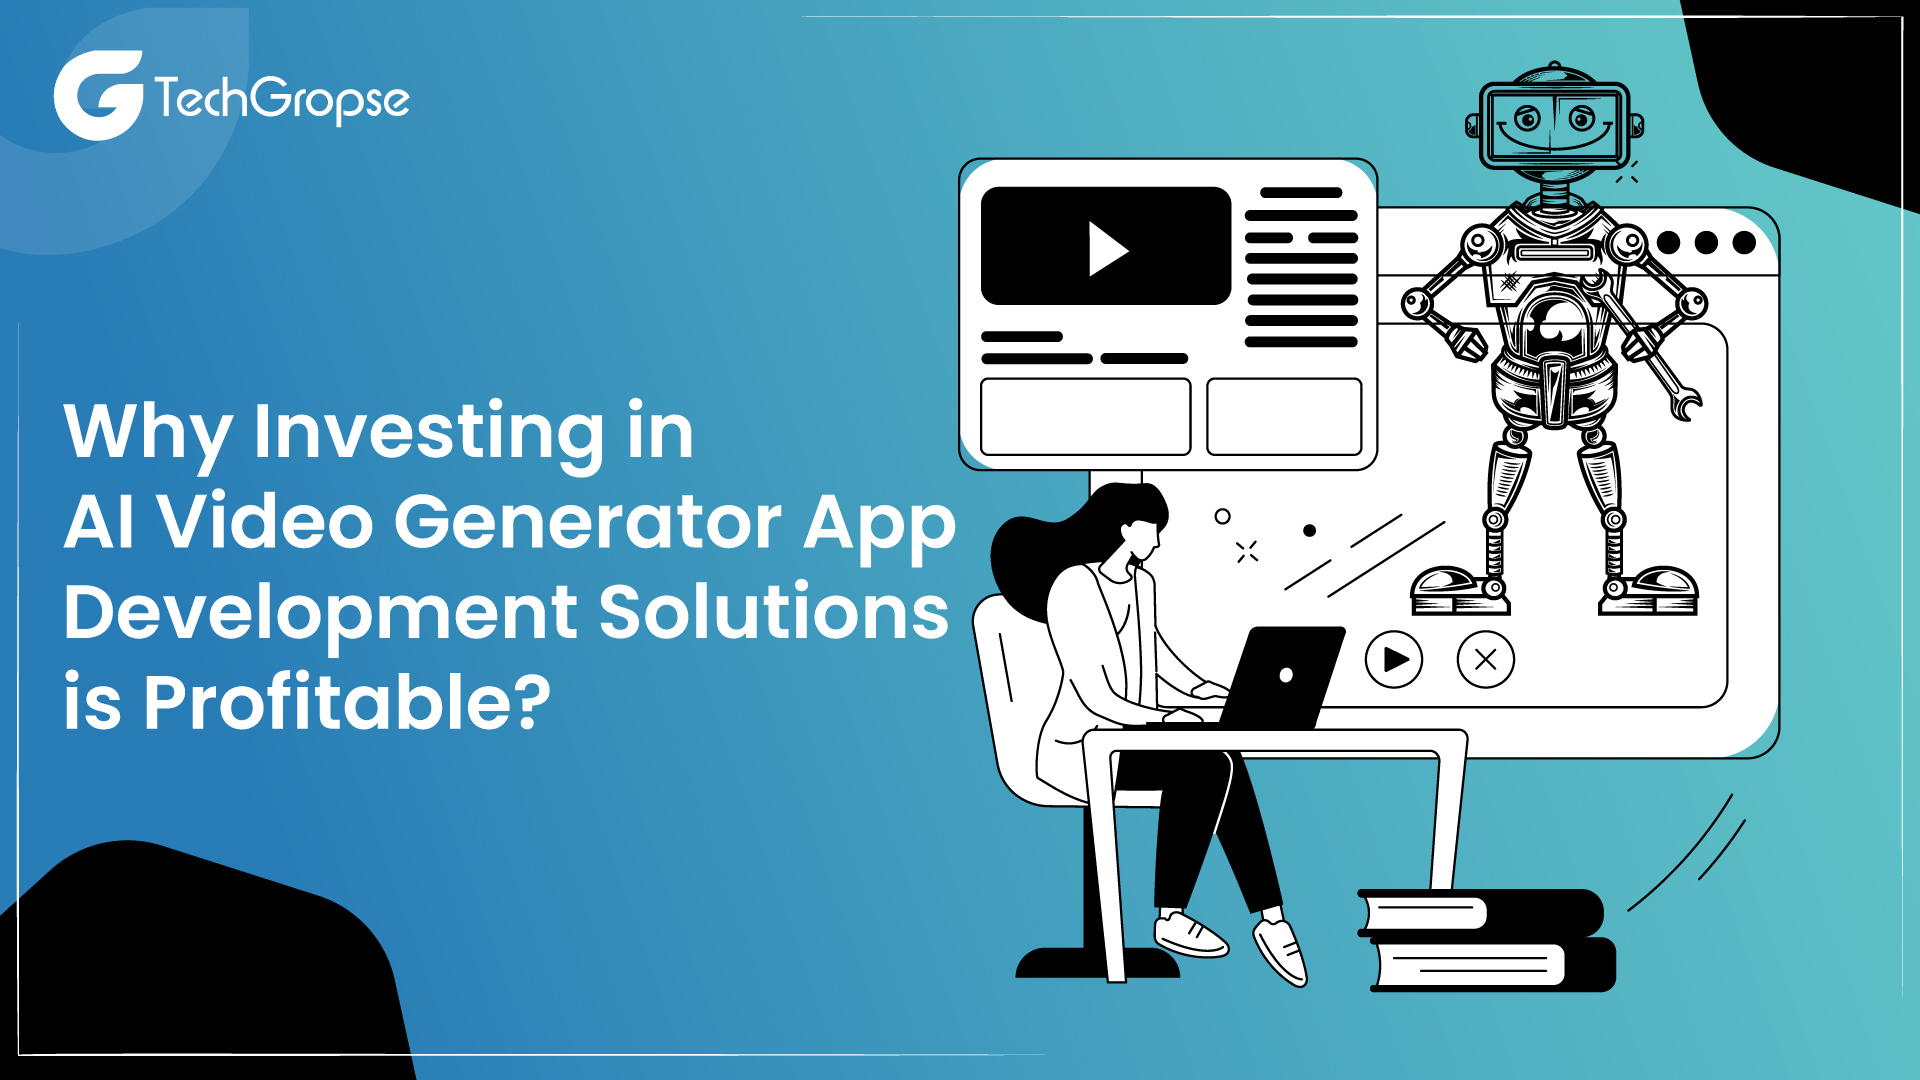 Why Investing in AI Video Generator App Development Solutions is Profitable?